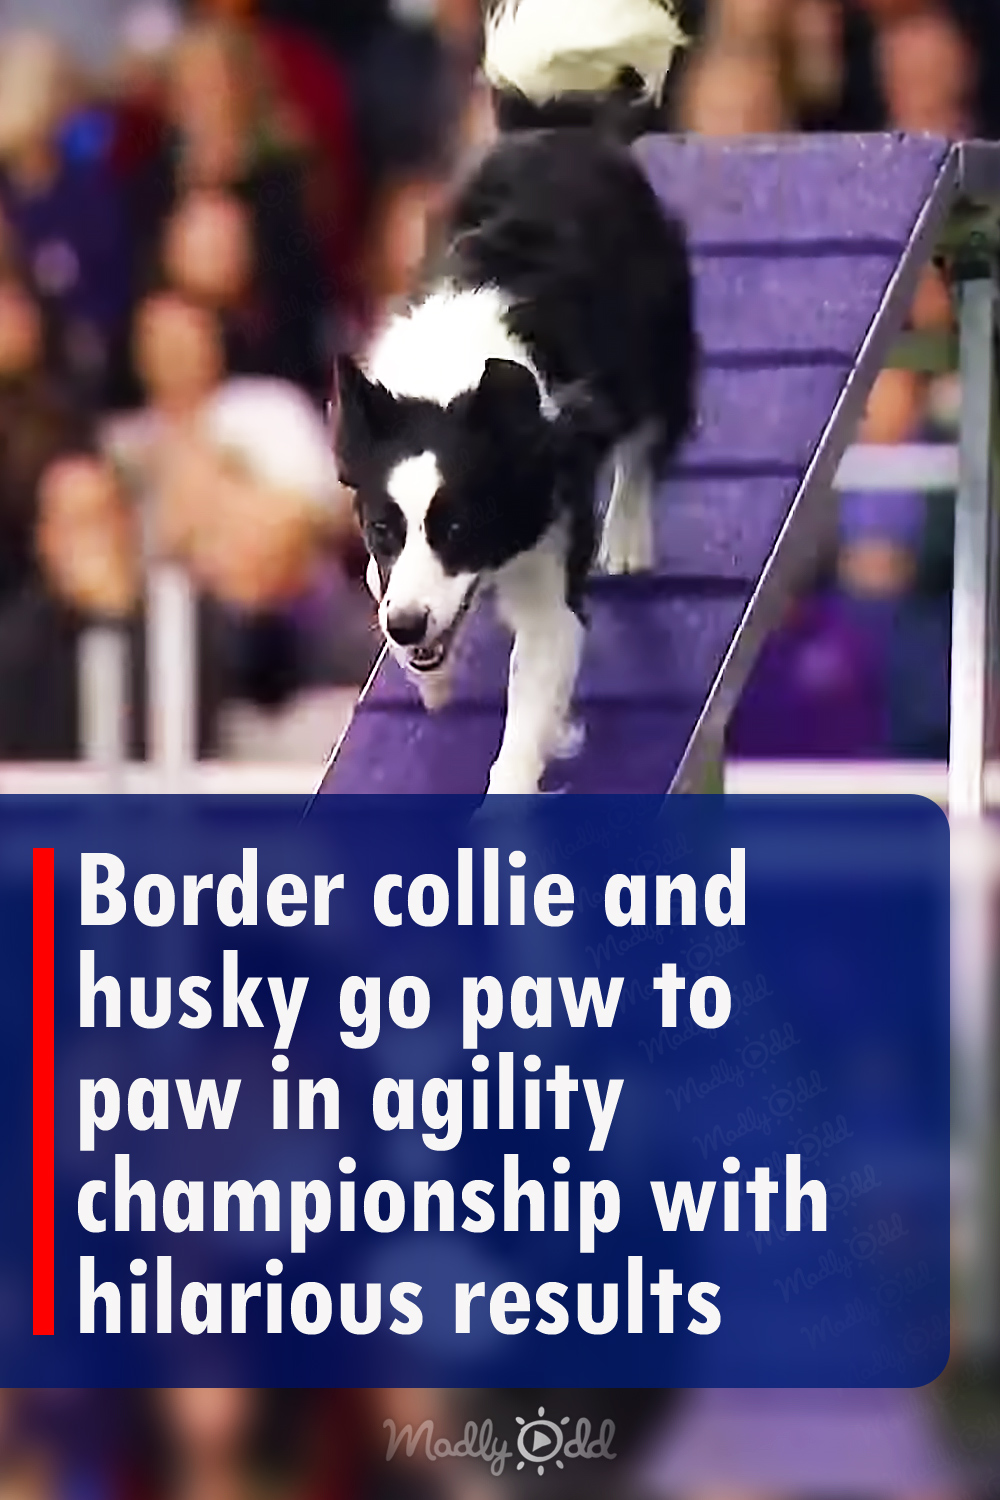 Border collie and husky go paw to paw in agility championship with hilarious results